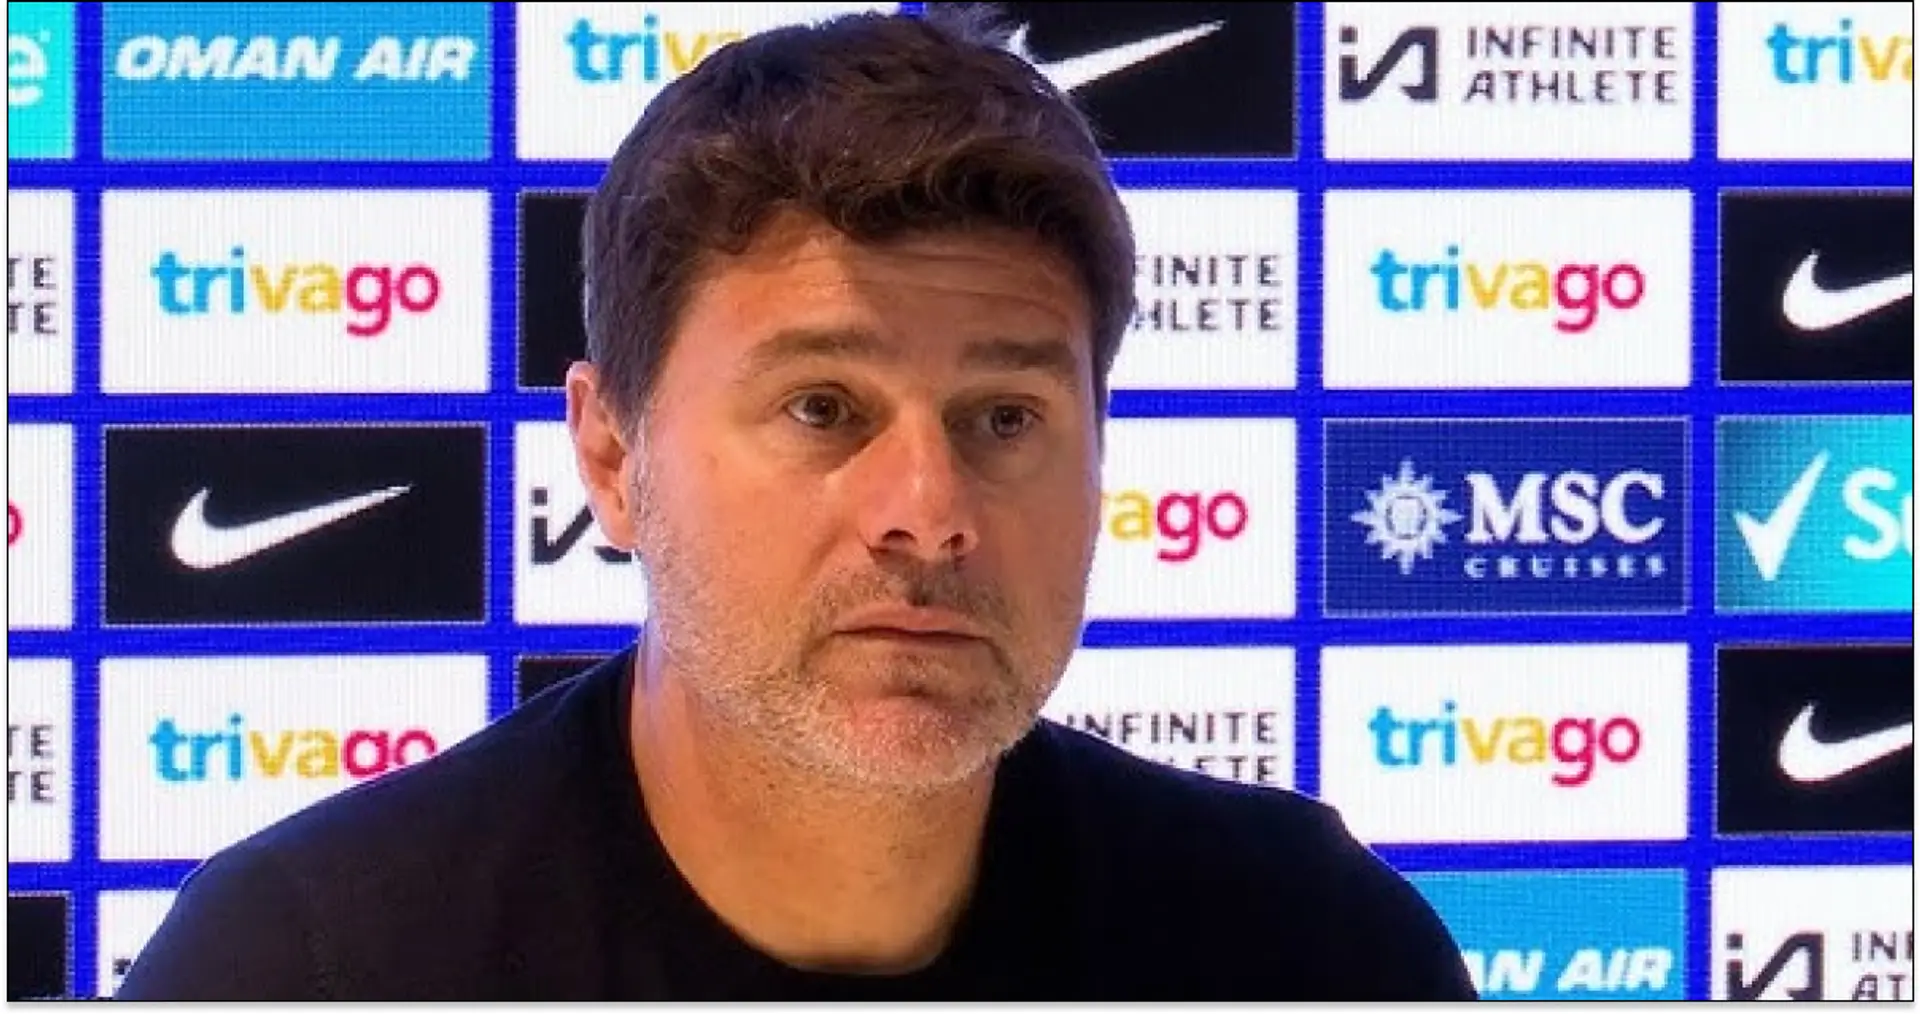 'I'd prefer if a phone doesn't ring': Poch goes to Spain for Chelsea three-day break